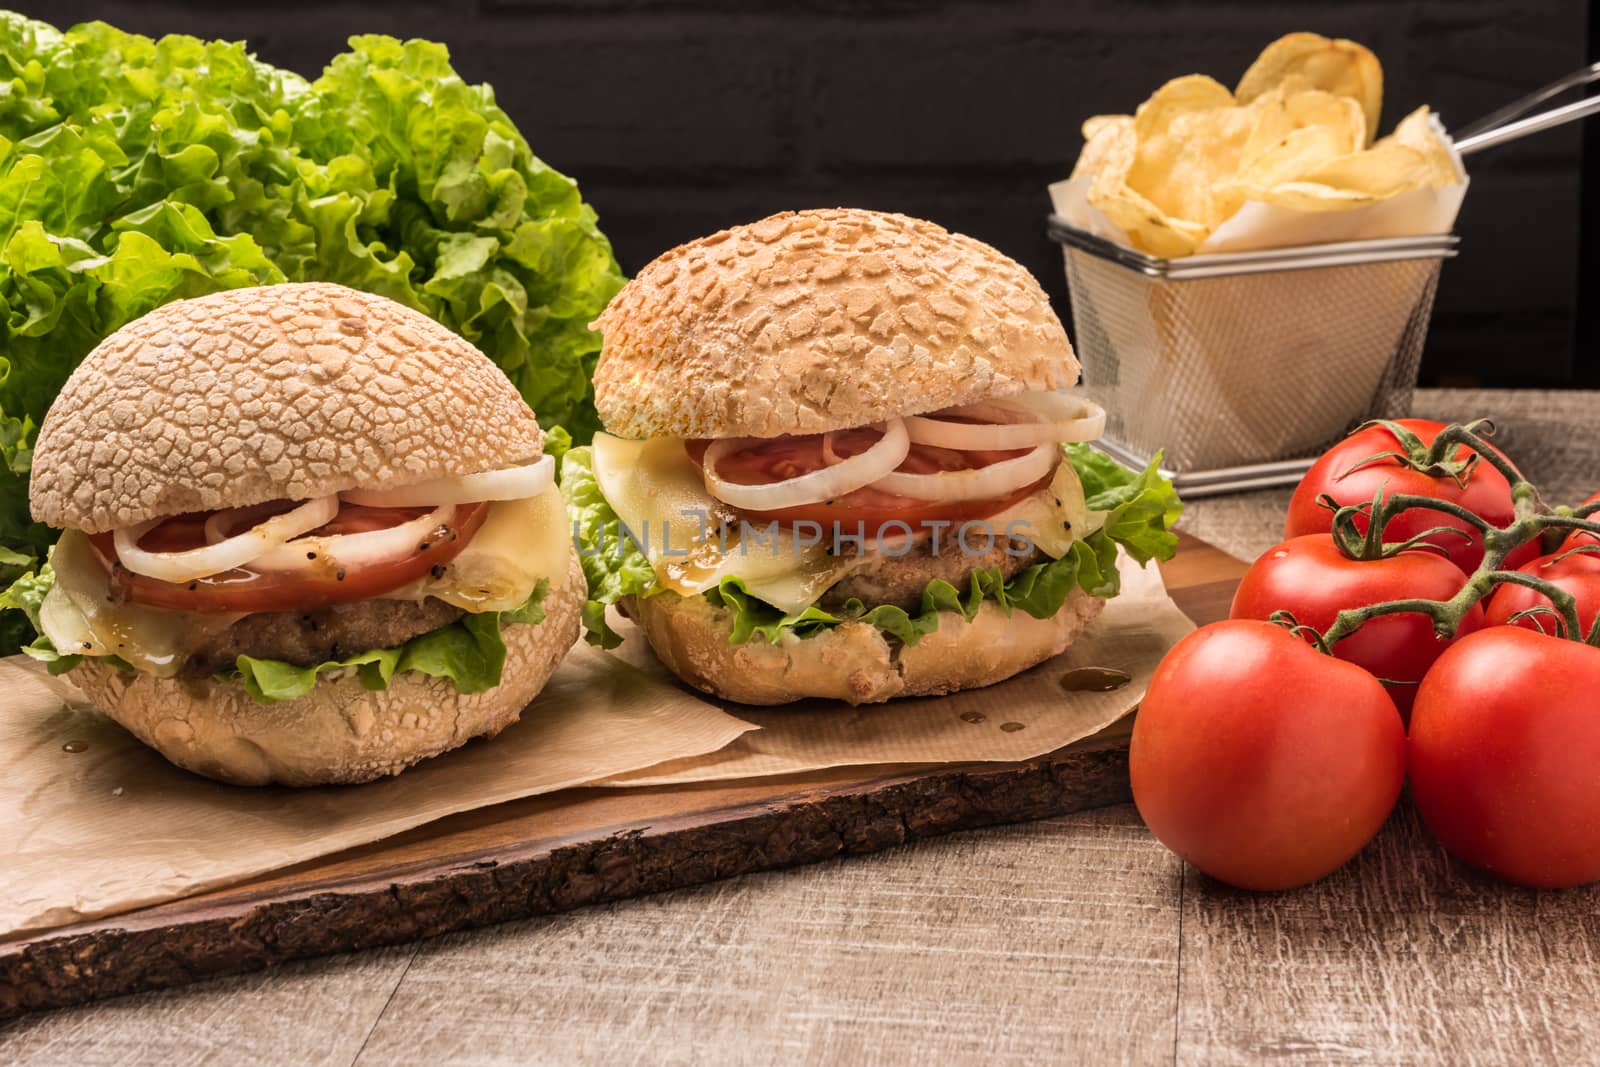 Two homemade vegetarian burgers  by AnaMarques